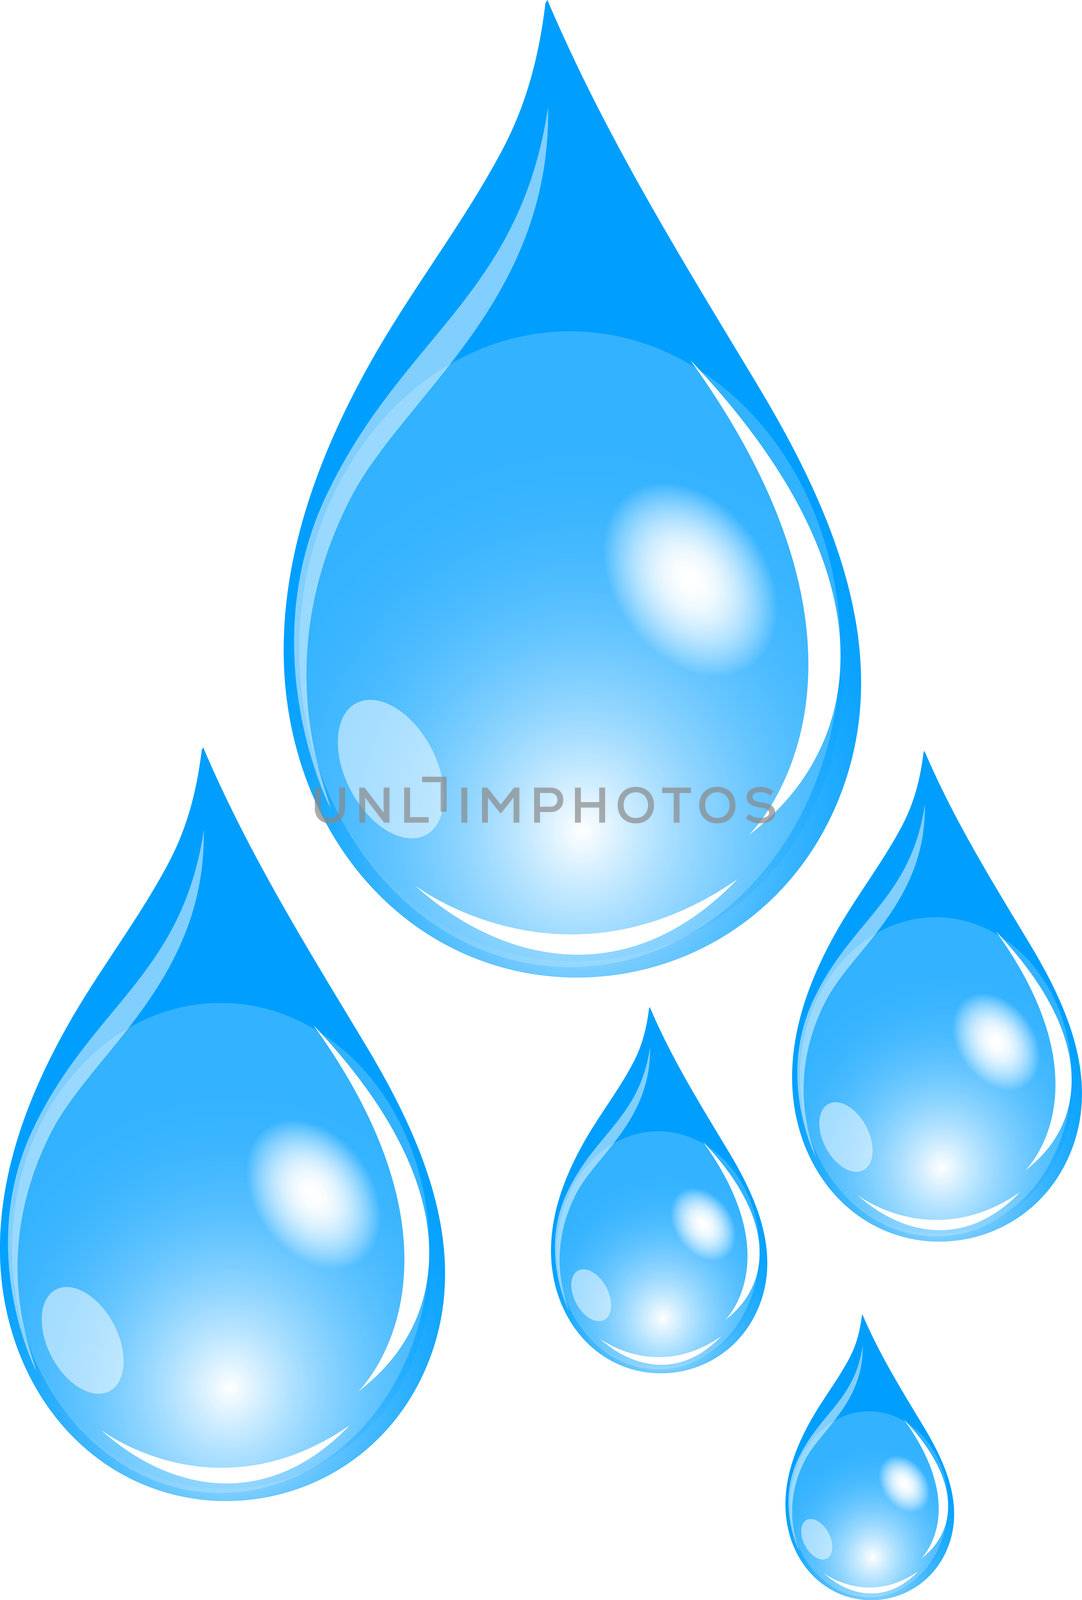 Illustration of  a set of blue waterdrops by peromarketing